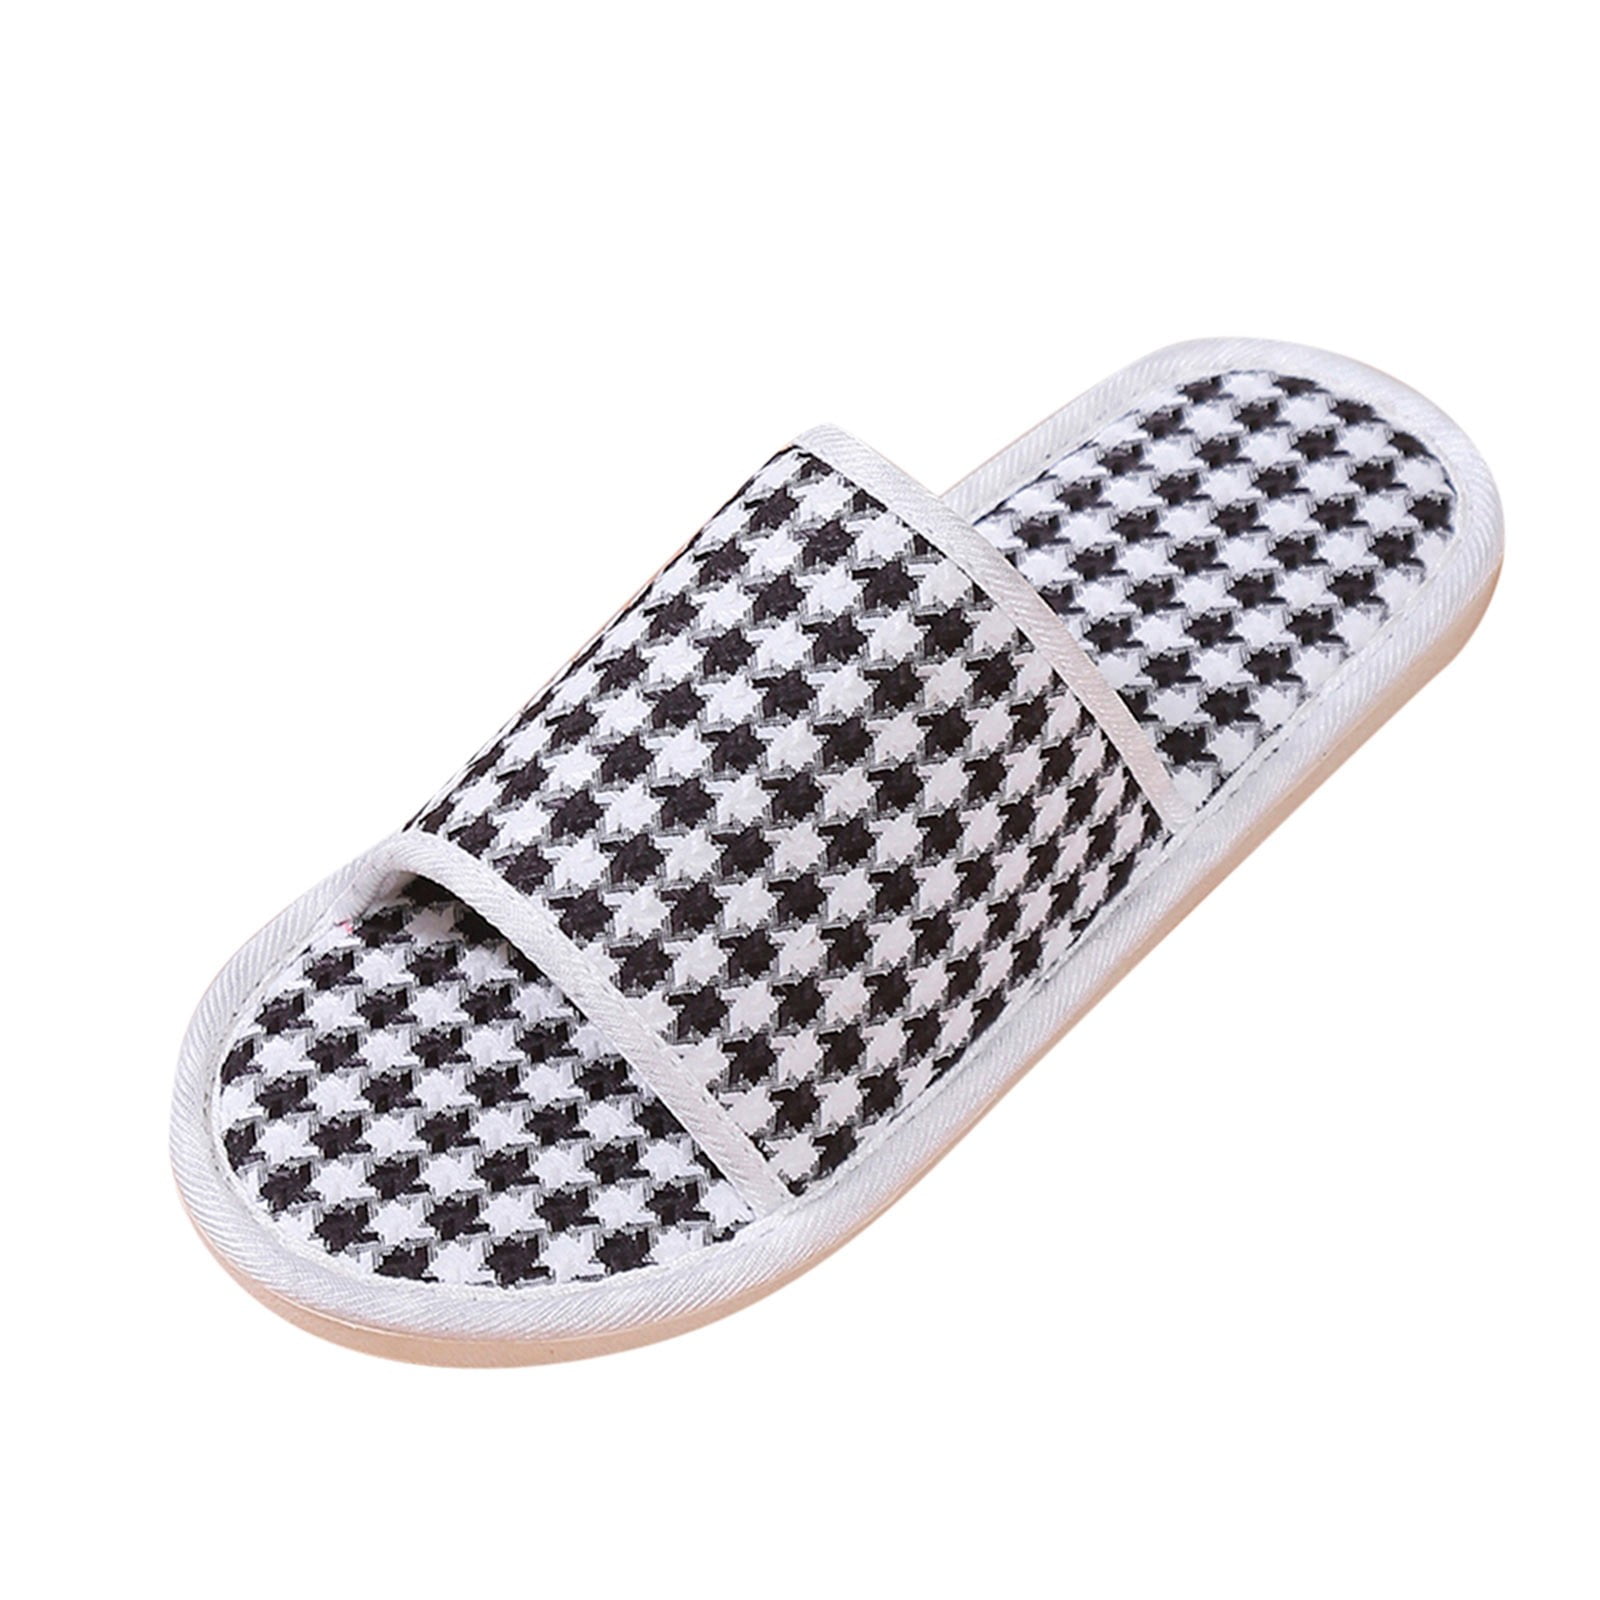 House Slippers For Women Fashion Autumn And Winter Women Slippers Home ...